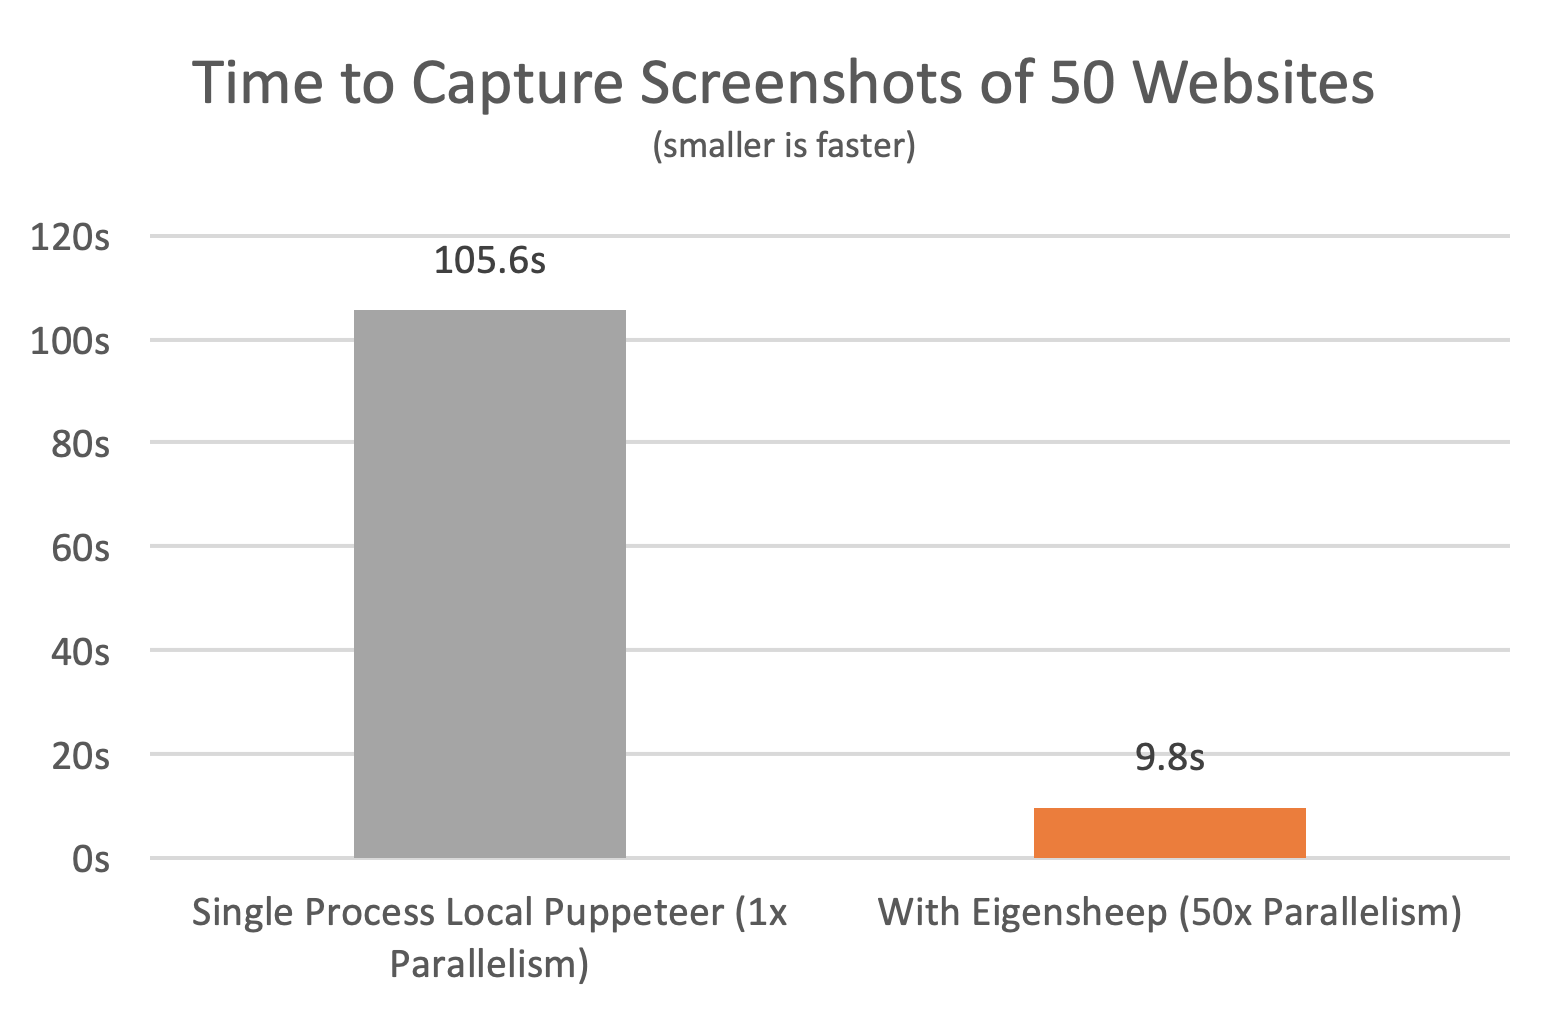 Sequentially opening 50 websites with Puppeteer and taking screenshots takes 105.6 seconds, while the same task split into 50 concurrent Lambda invocations finishes in 9.8 seconds